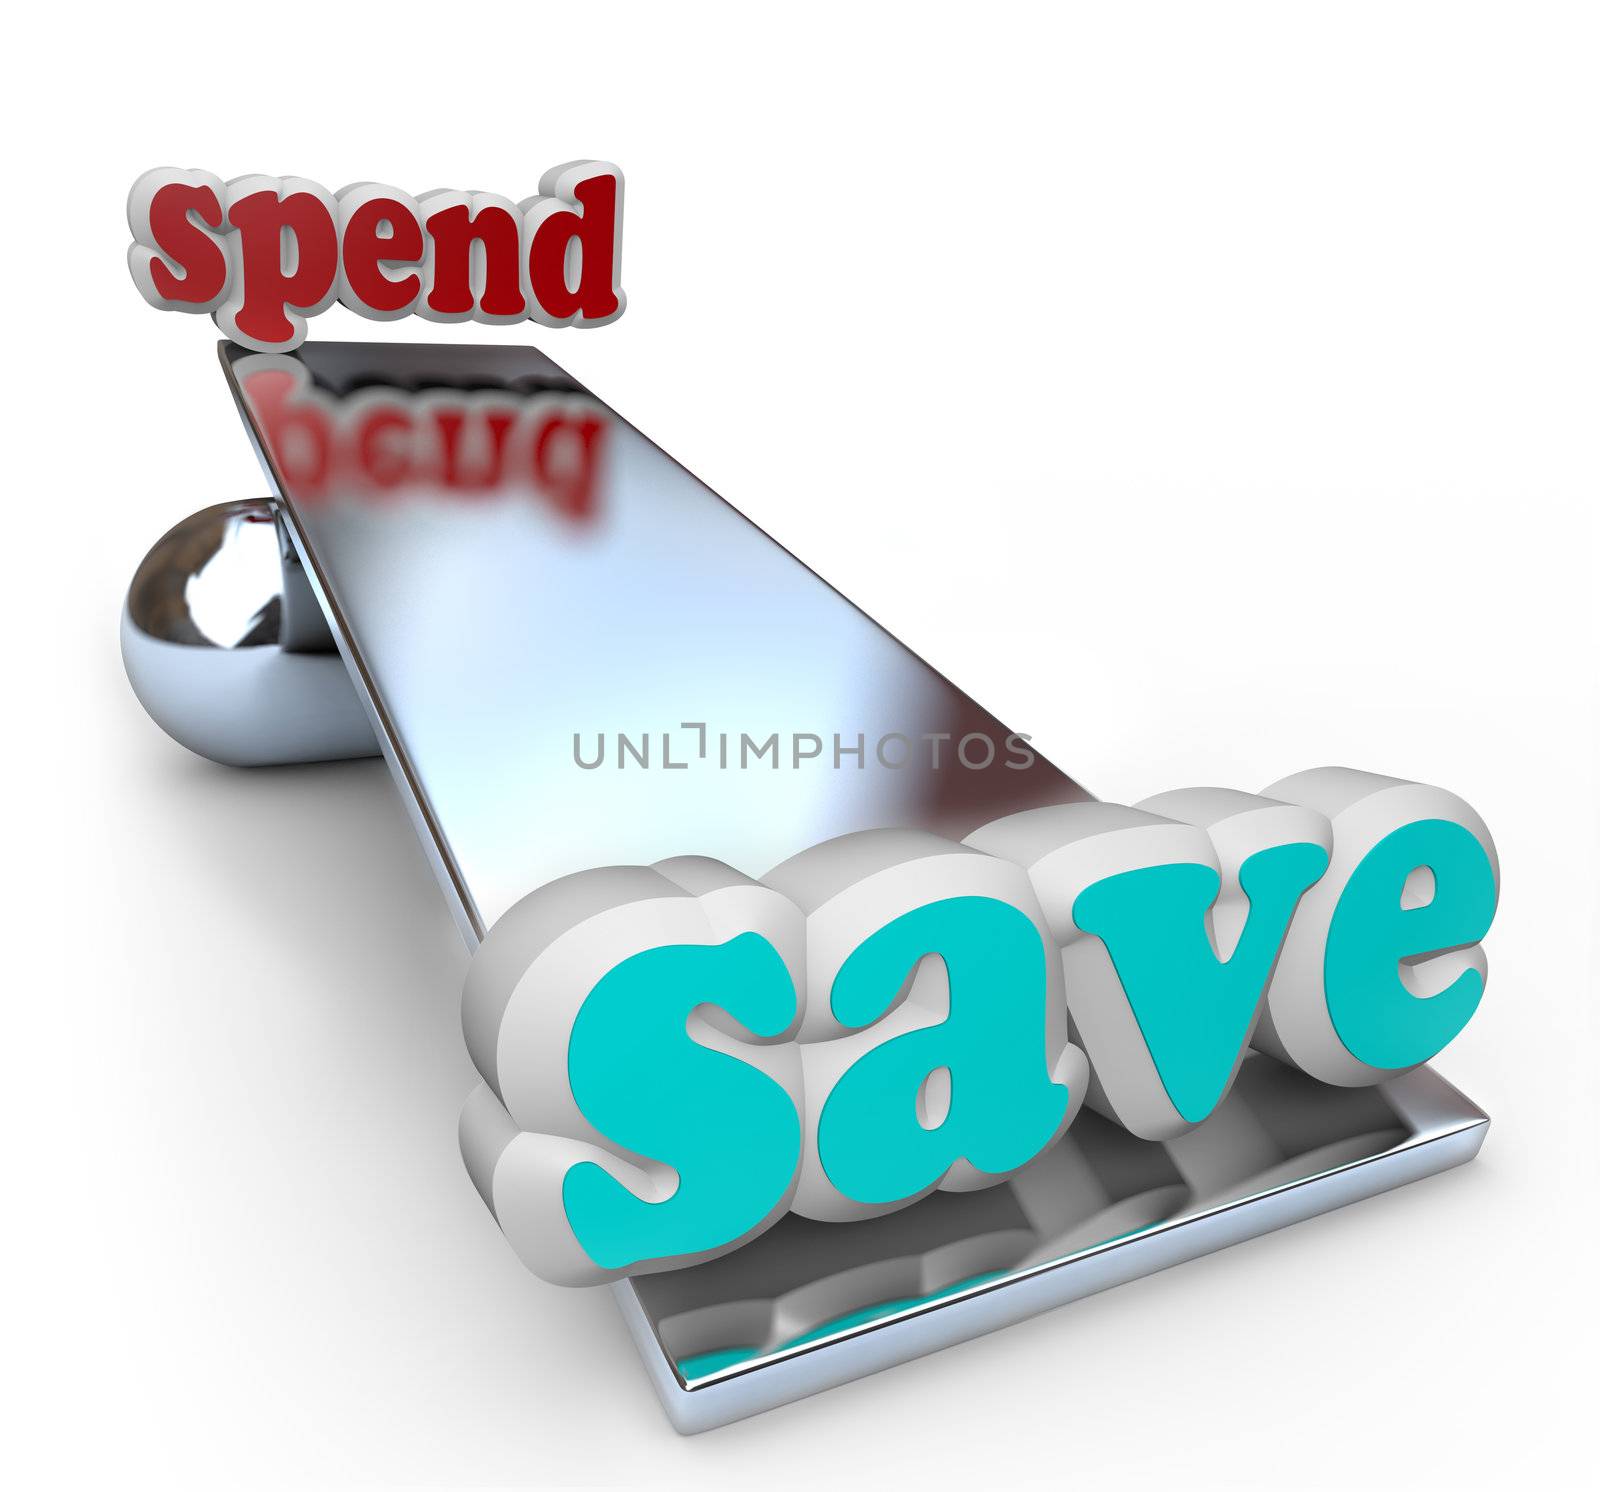 The word Save tips a see-saw scale toward fiscal responsibility vs the word Spend, representing the importance of saving money to build wealth and create a comfortable nest egg for retirement or other nice things in life